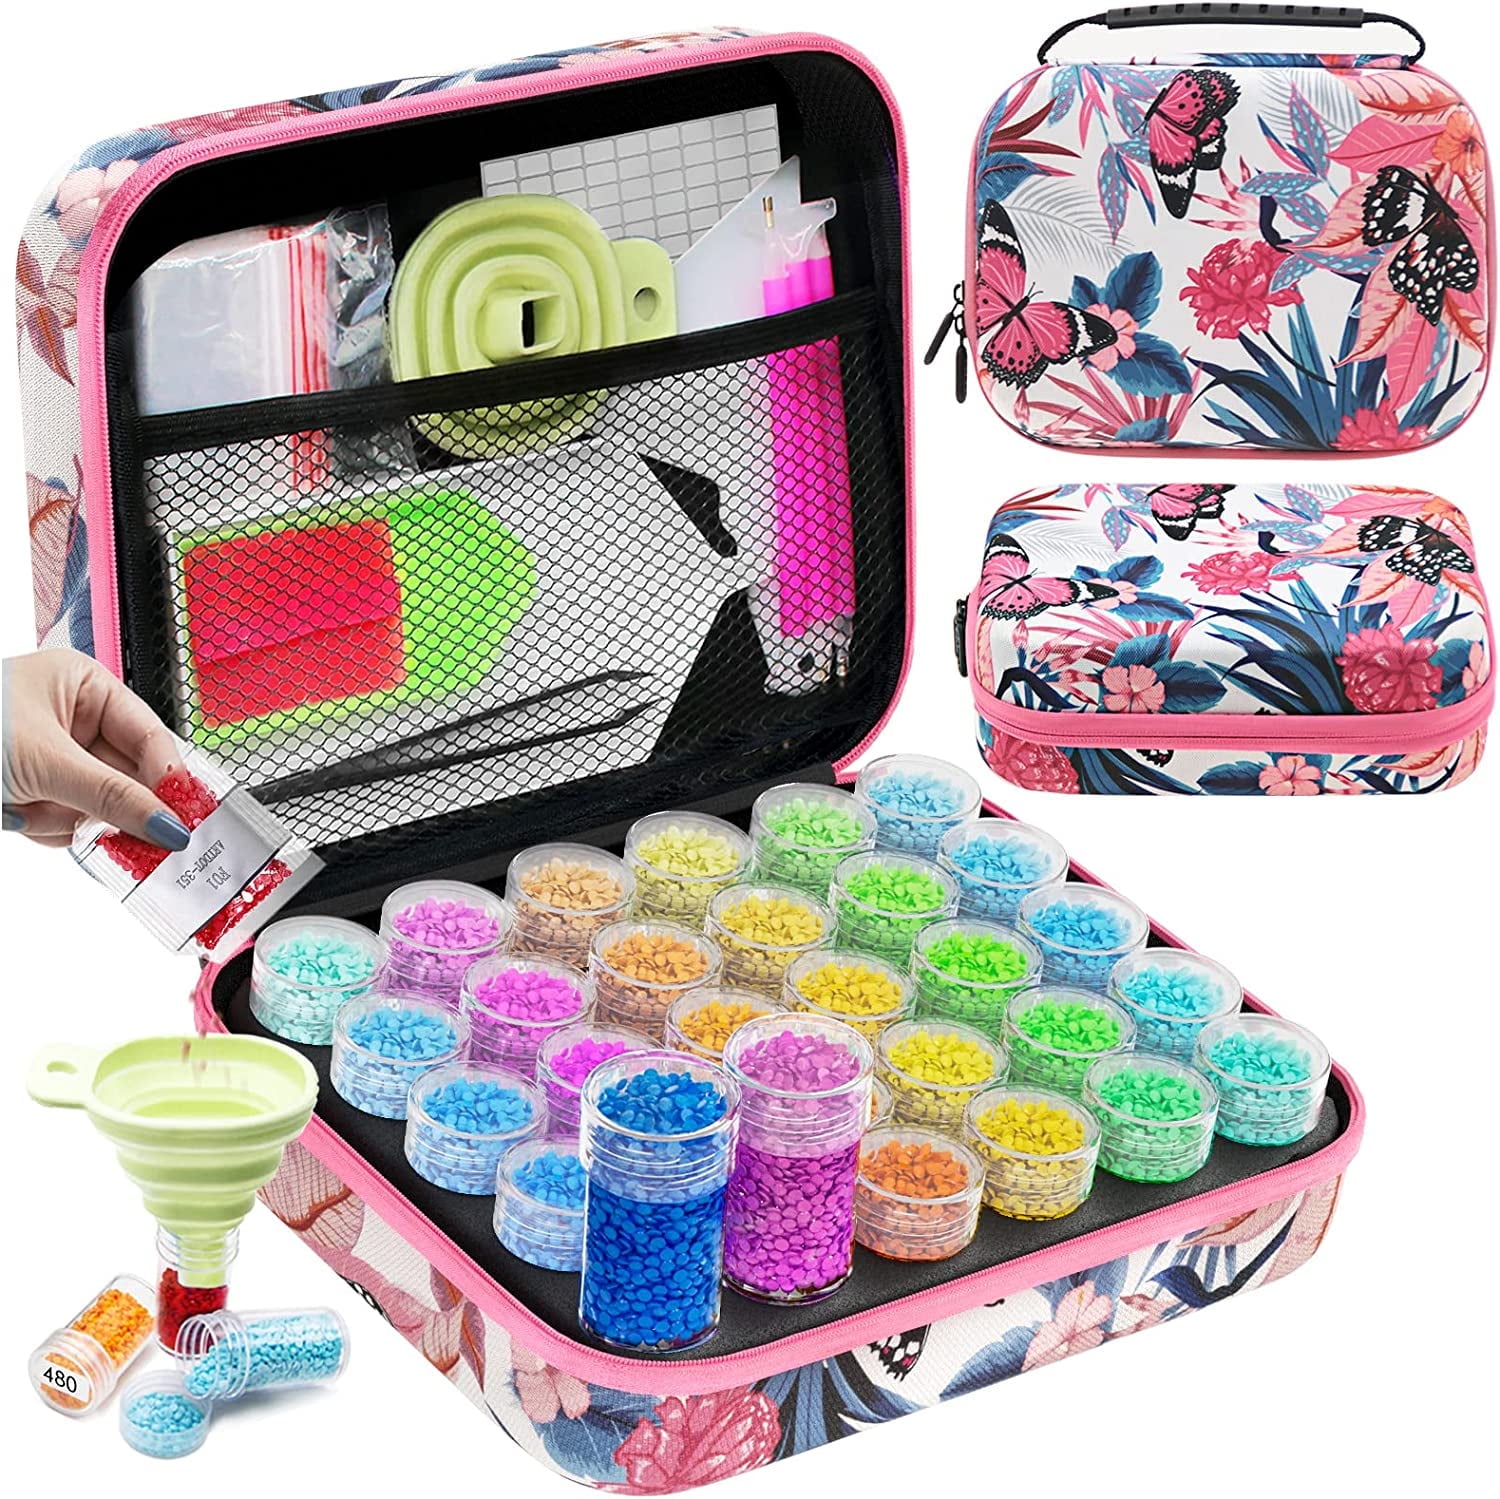 Diamond painting storage - 80 compartments in one spool!!! : r